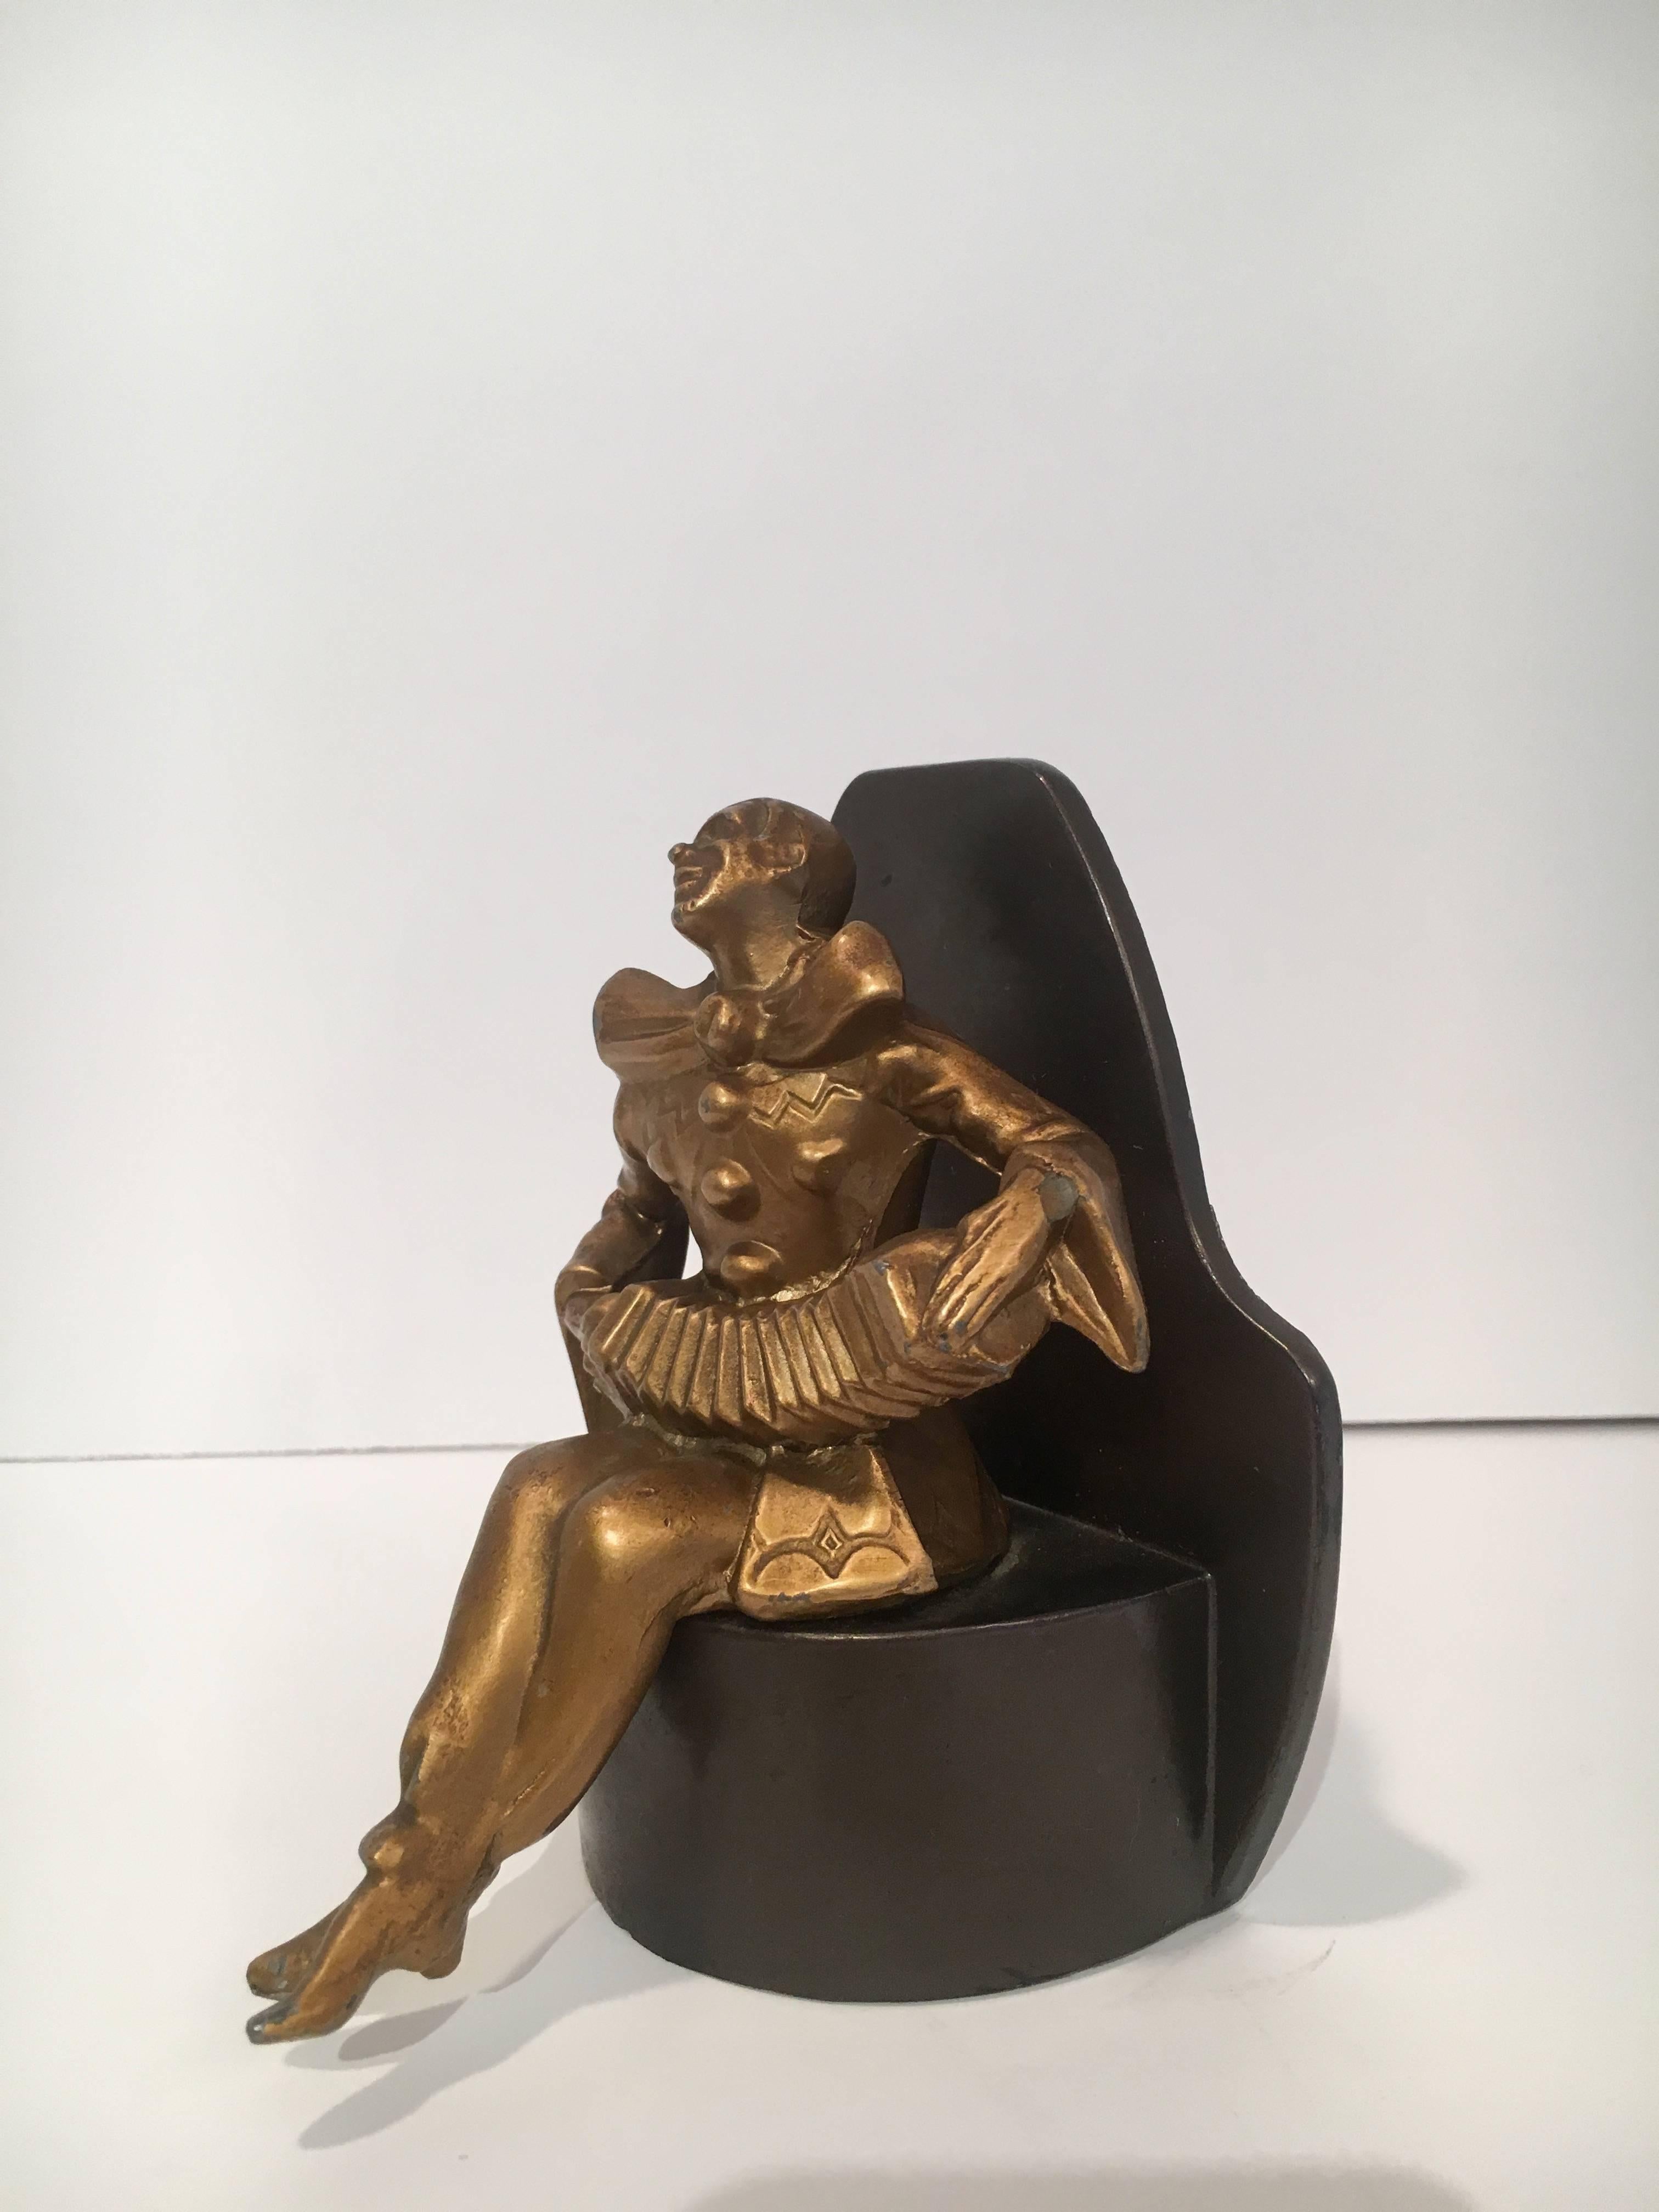 Art Deco gold jester bookend on black base. The jester is glad to watch over your books.